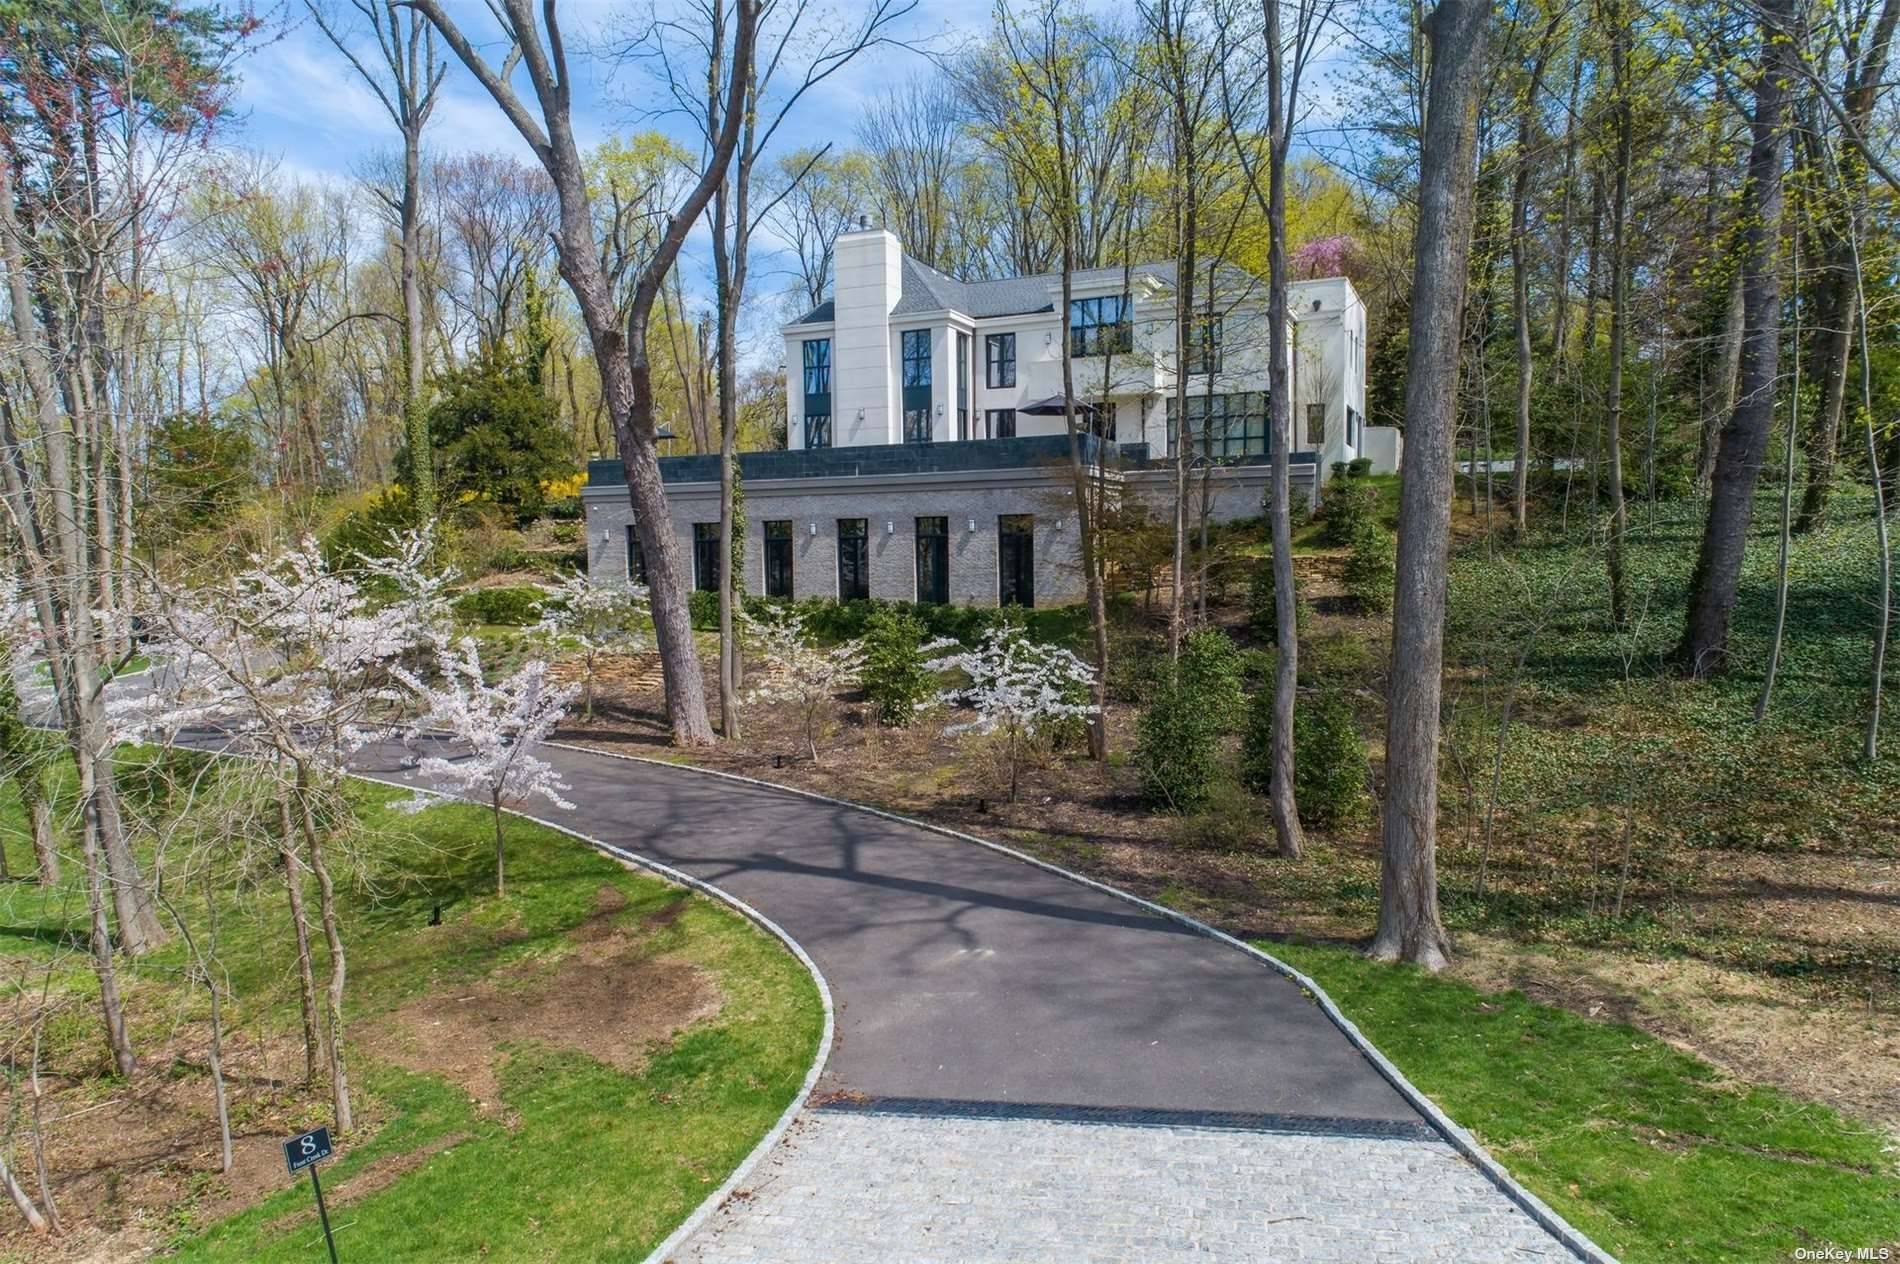 Those with an eye for refinement will be captivated by the exceptional architectural finesse and unparalleled luxury displayed in this hilltop Classic Contemporary Estate.